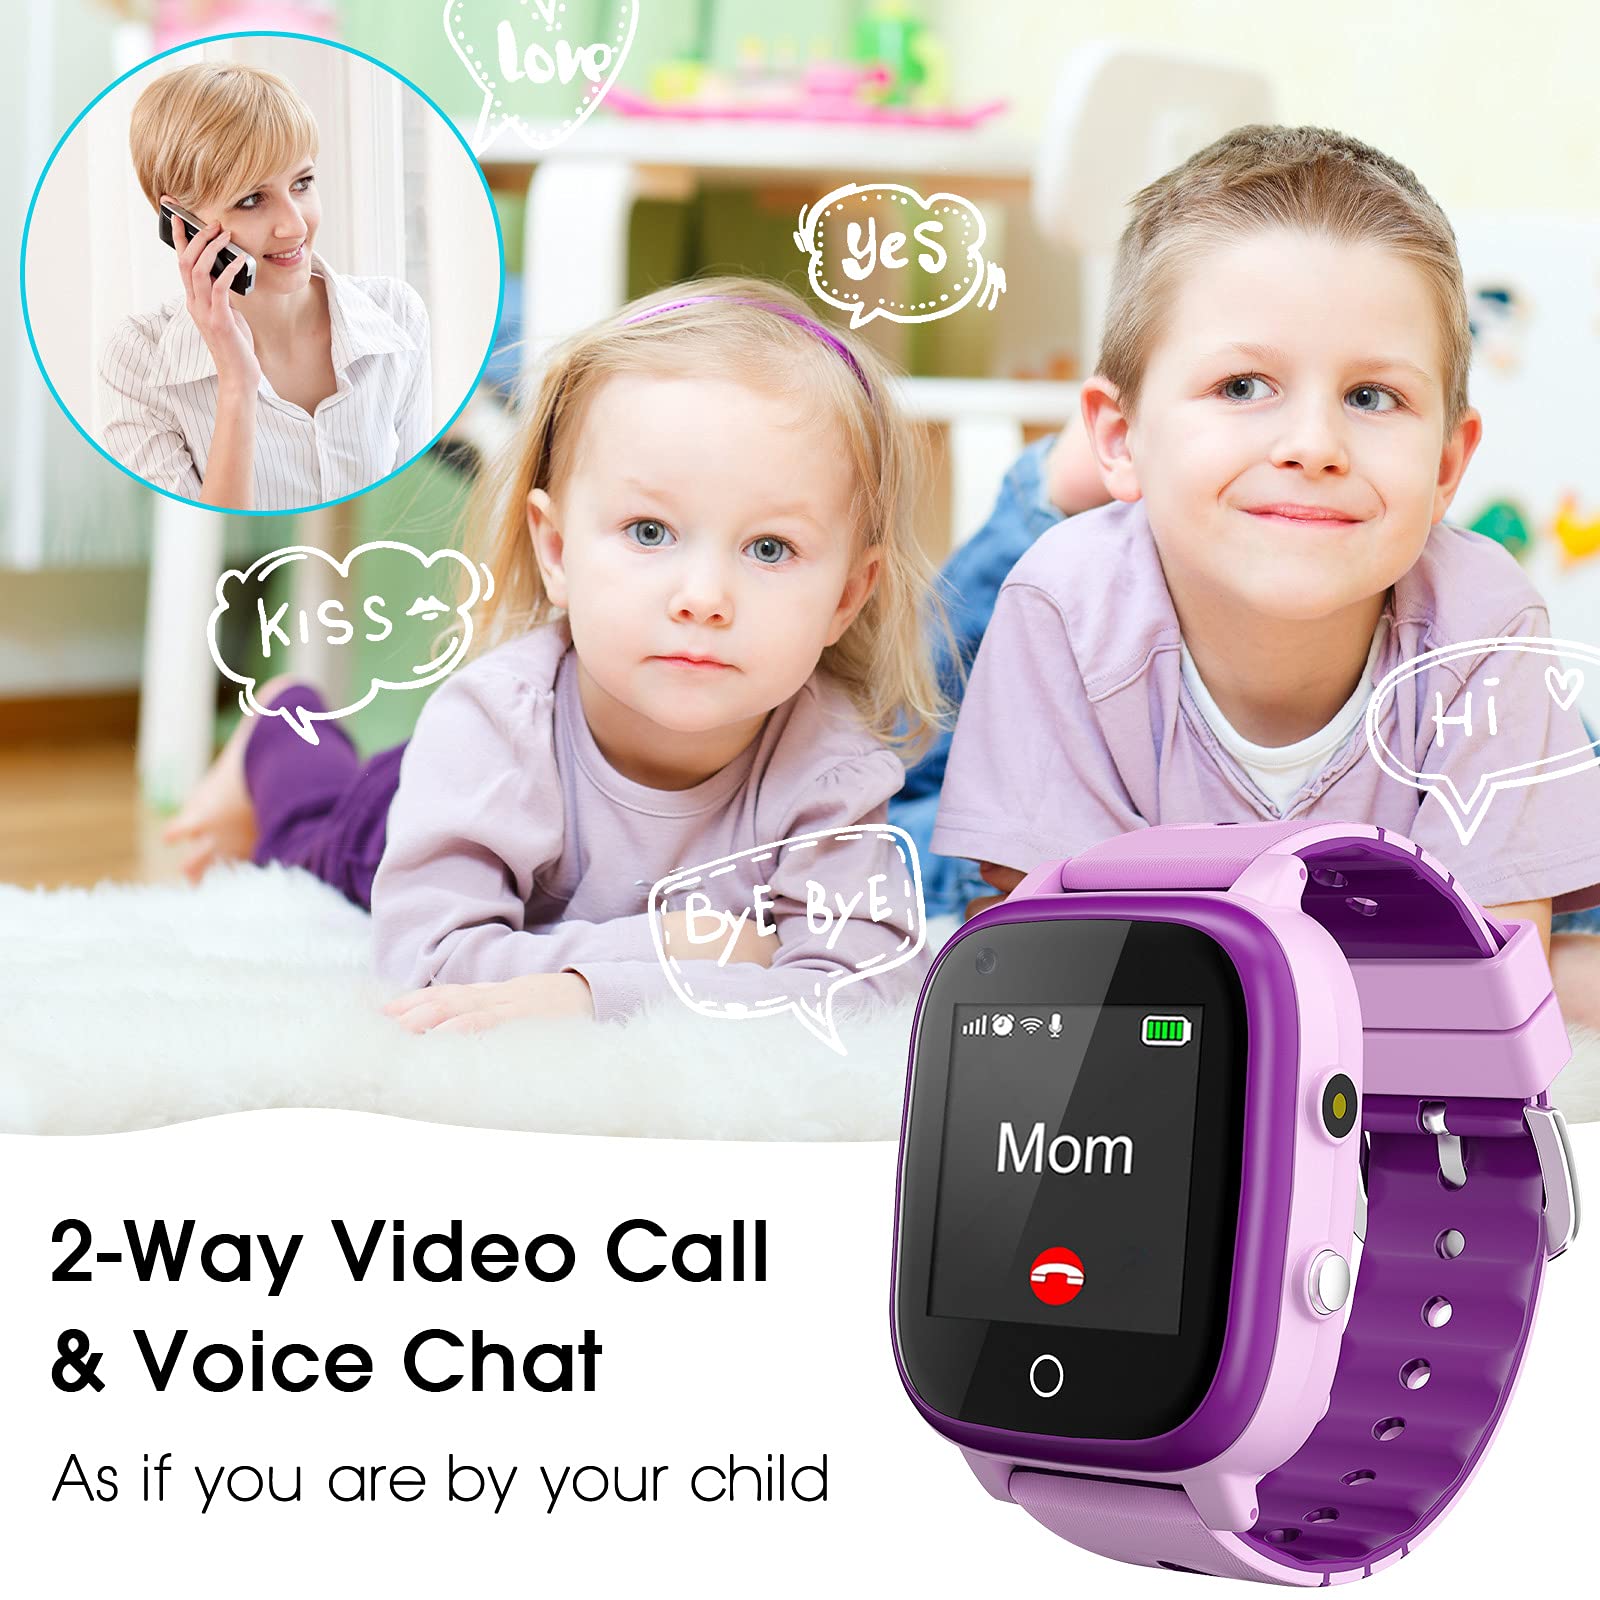 cjc Kids Smart Watch, 4G Kid Smartwatch with GPS Tracker and Calling, SOS Kids Cell Phone Watch, 3-15 Years Boys Girls Christmas Birthday Gifts (Purple T3)